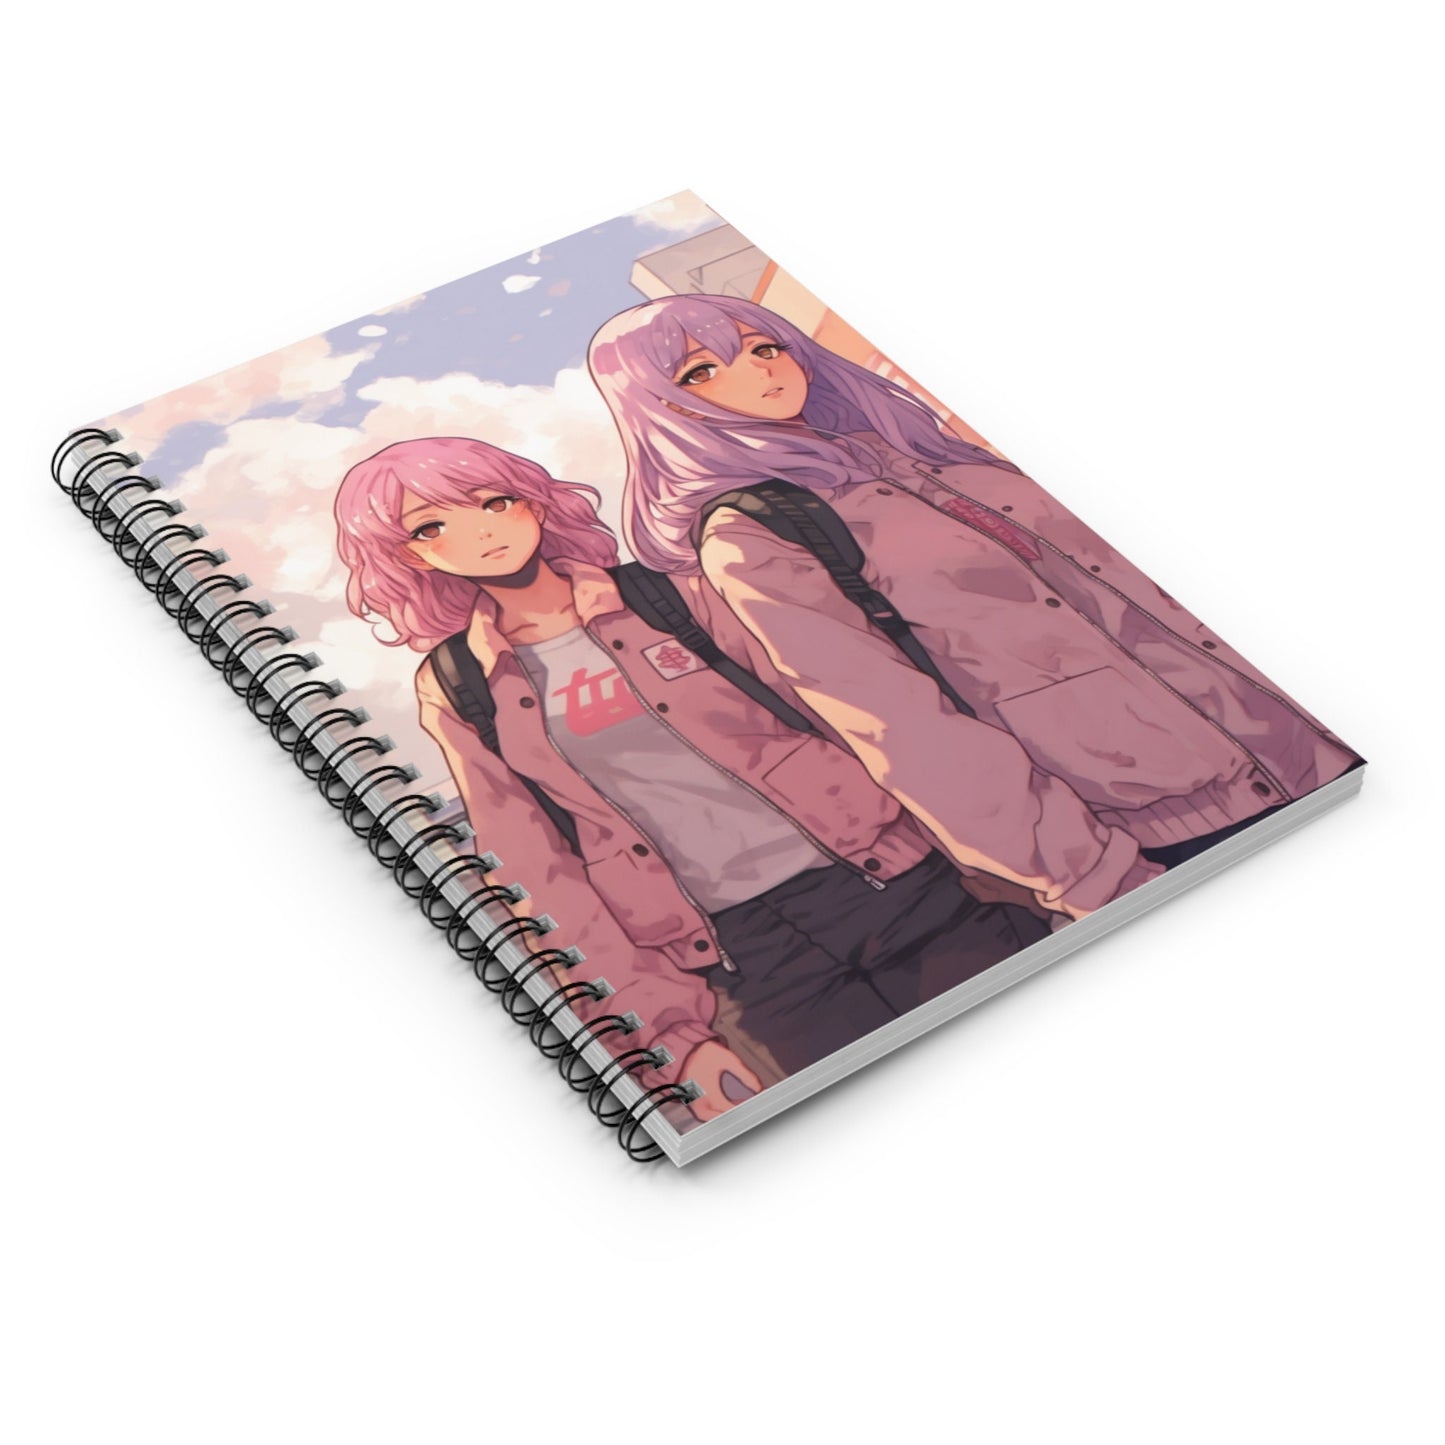 Kawaii Anime Girls Spiral Notebook Ruled Lines Journal Notebook Stationary Gift Durable Cover 6x8 Inches